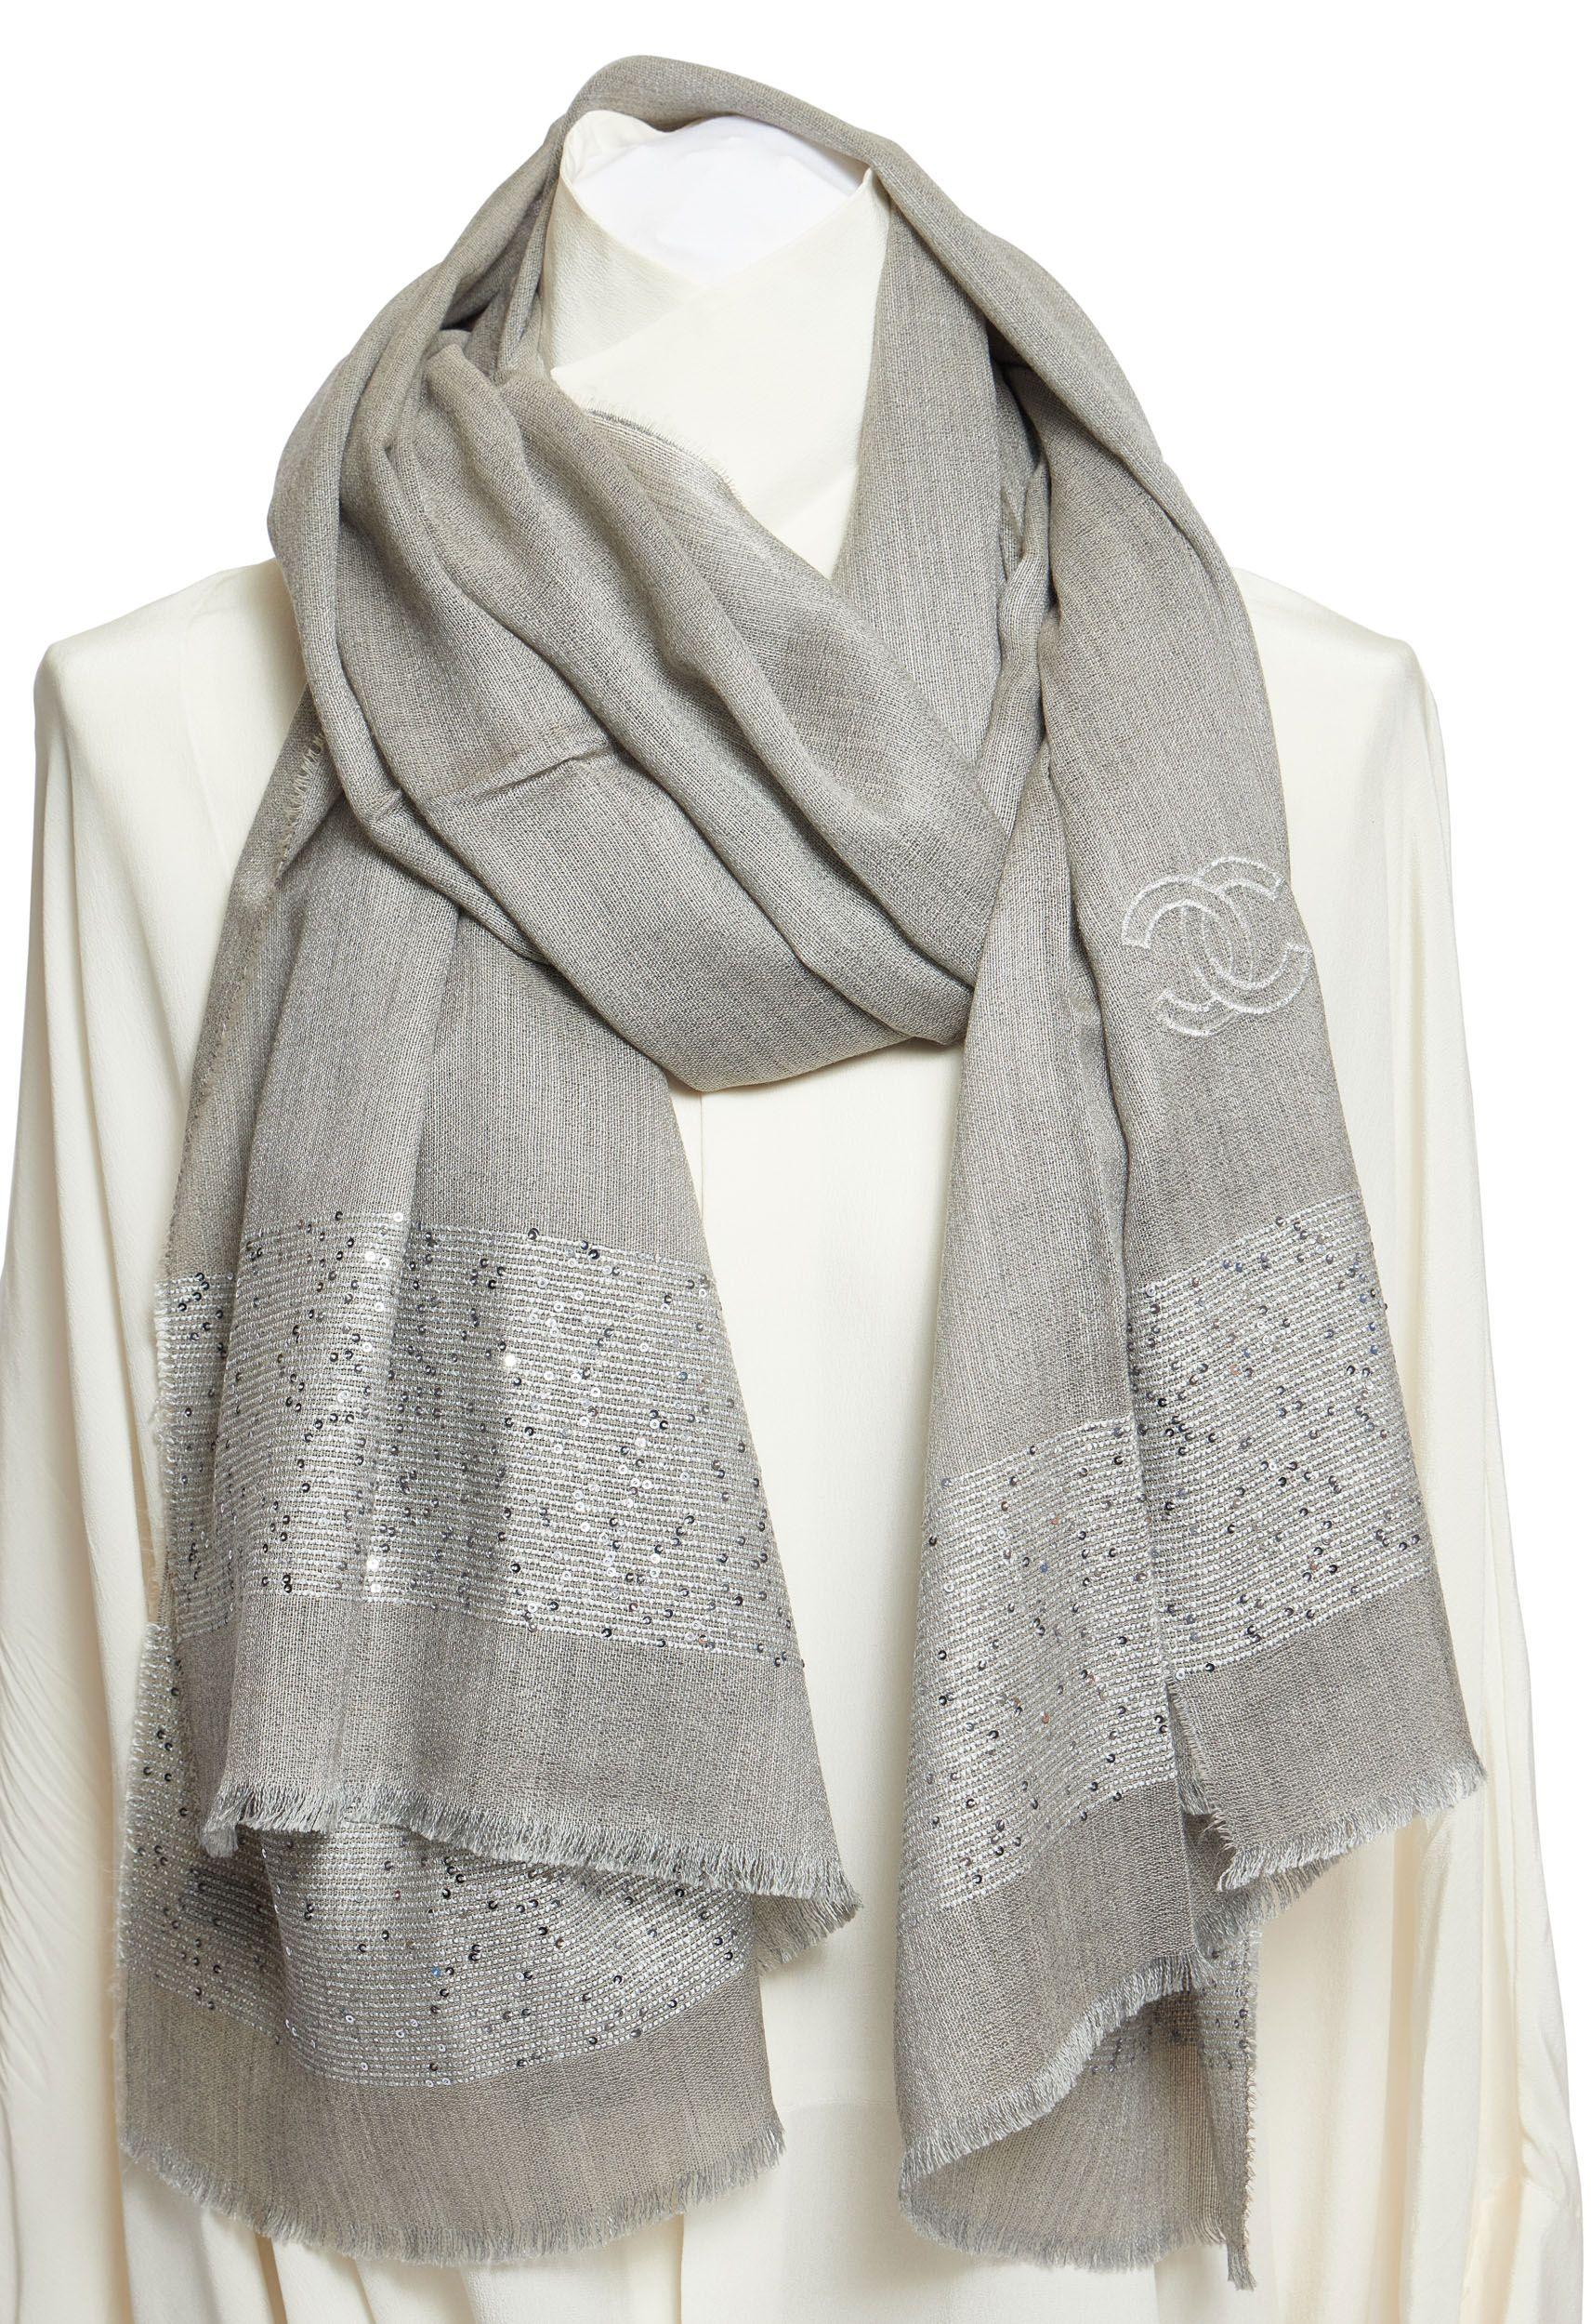 This Chanel cashmere and silk shawl in grey is a must have. The piece shows different grey tones which makes it easy to combine with different outfits. There is a big CC logo webbed in and small sequins are attached to the trim. The scarf is made